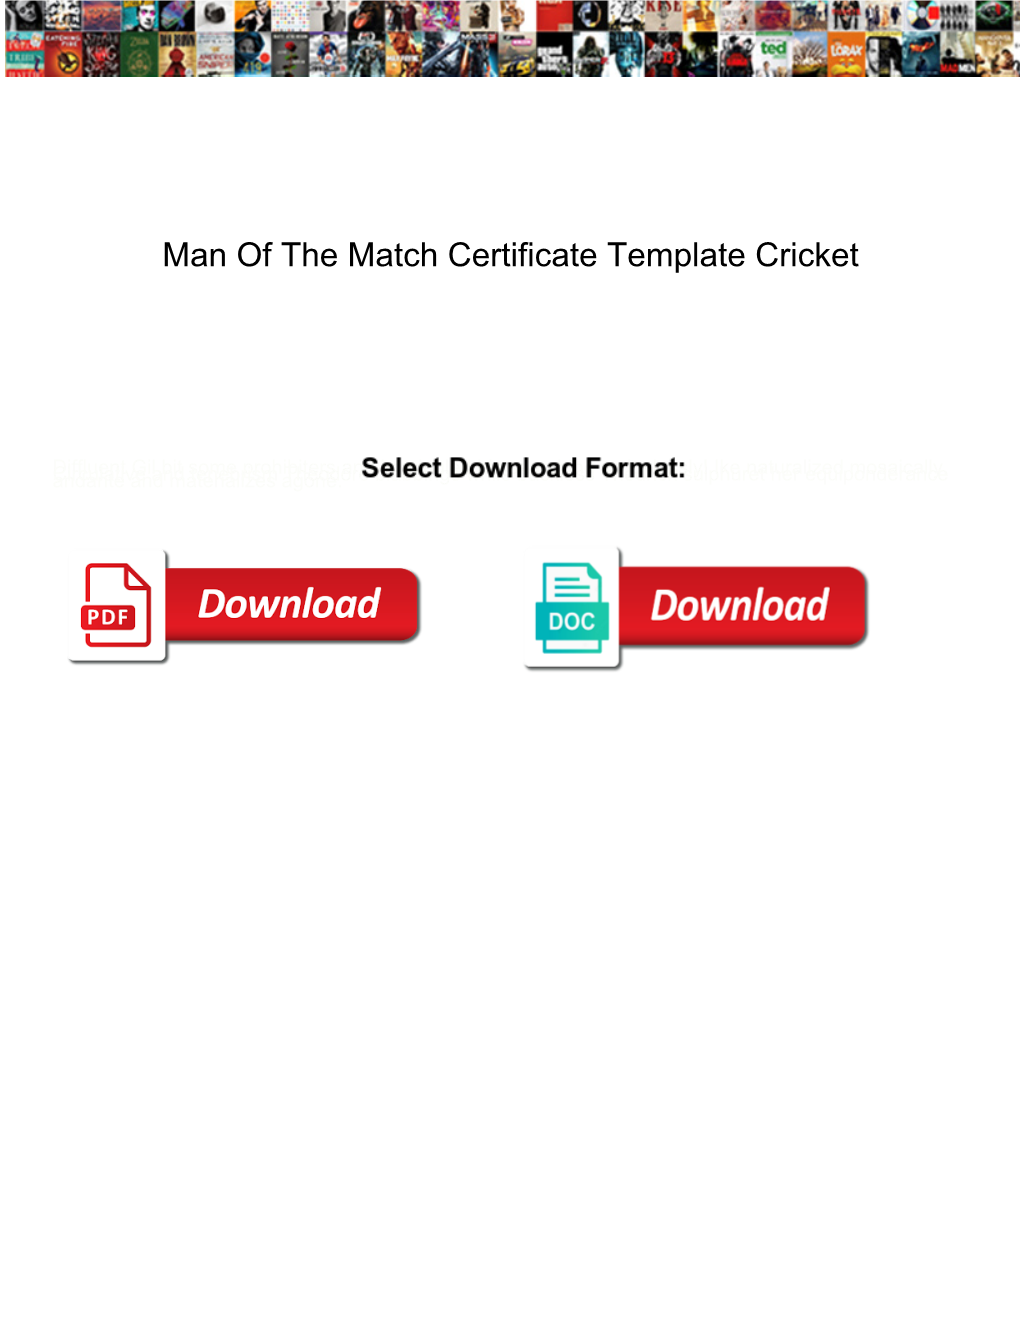 Man of the Match Certificate Template Cricket